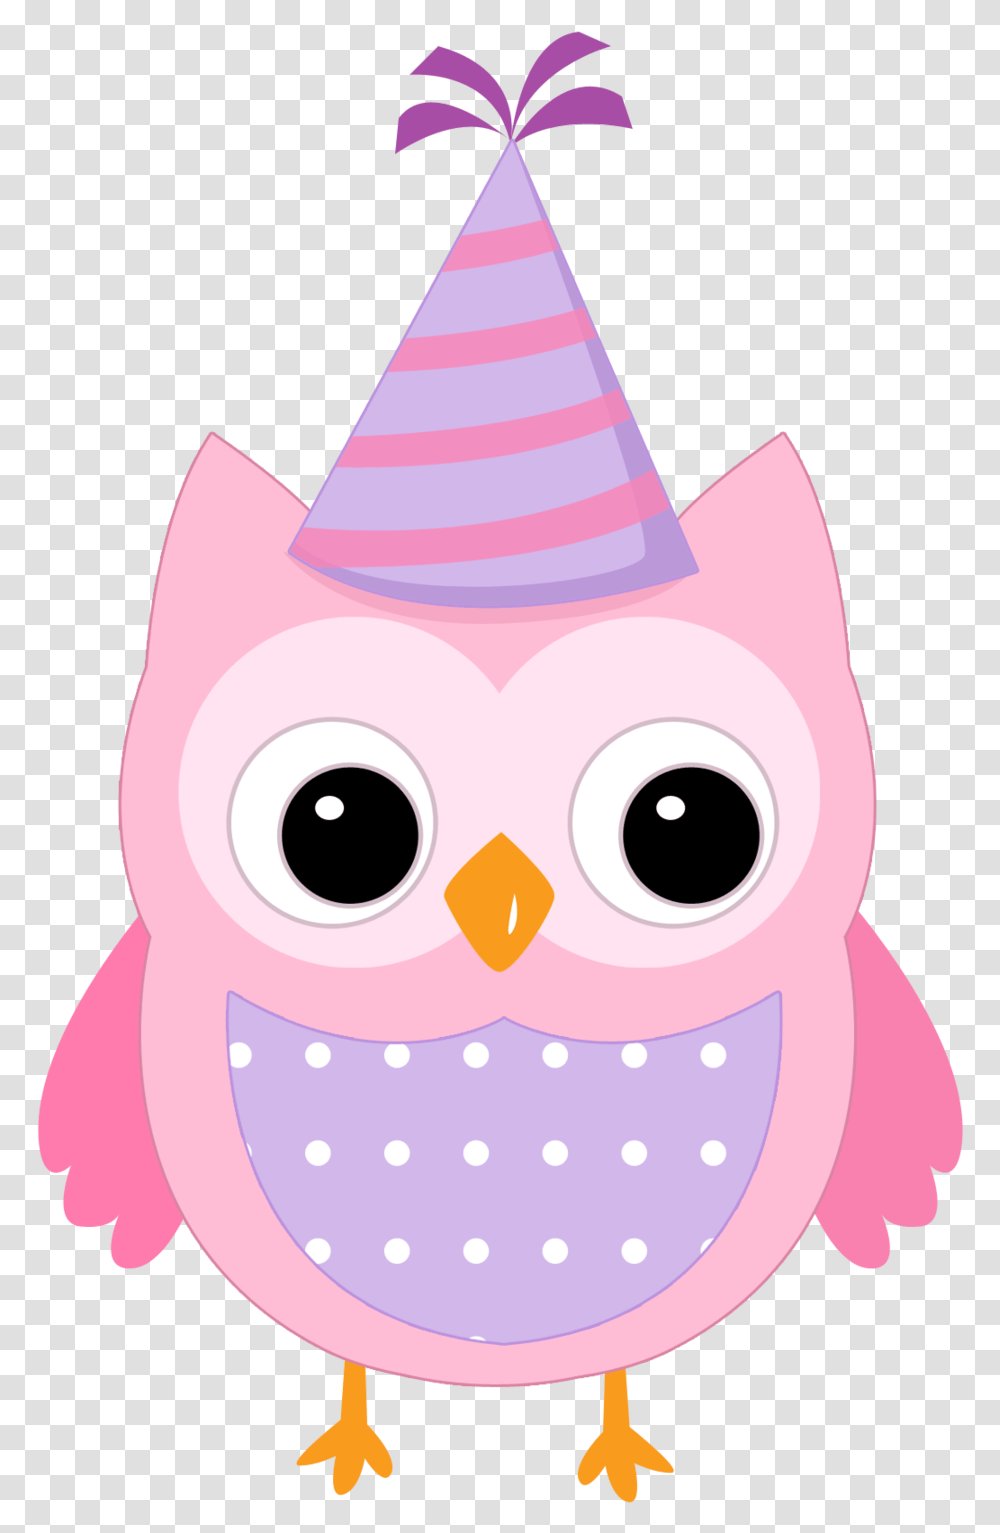 Download Hd Colors Birthday Hat Vector Clipart Picture Cute Birthday Owl Clipart, Clothing, Apparel, Party Hat, Animal Transparent Png